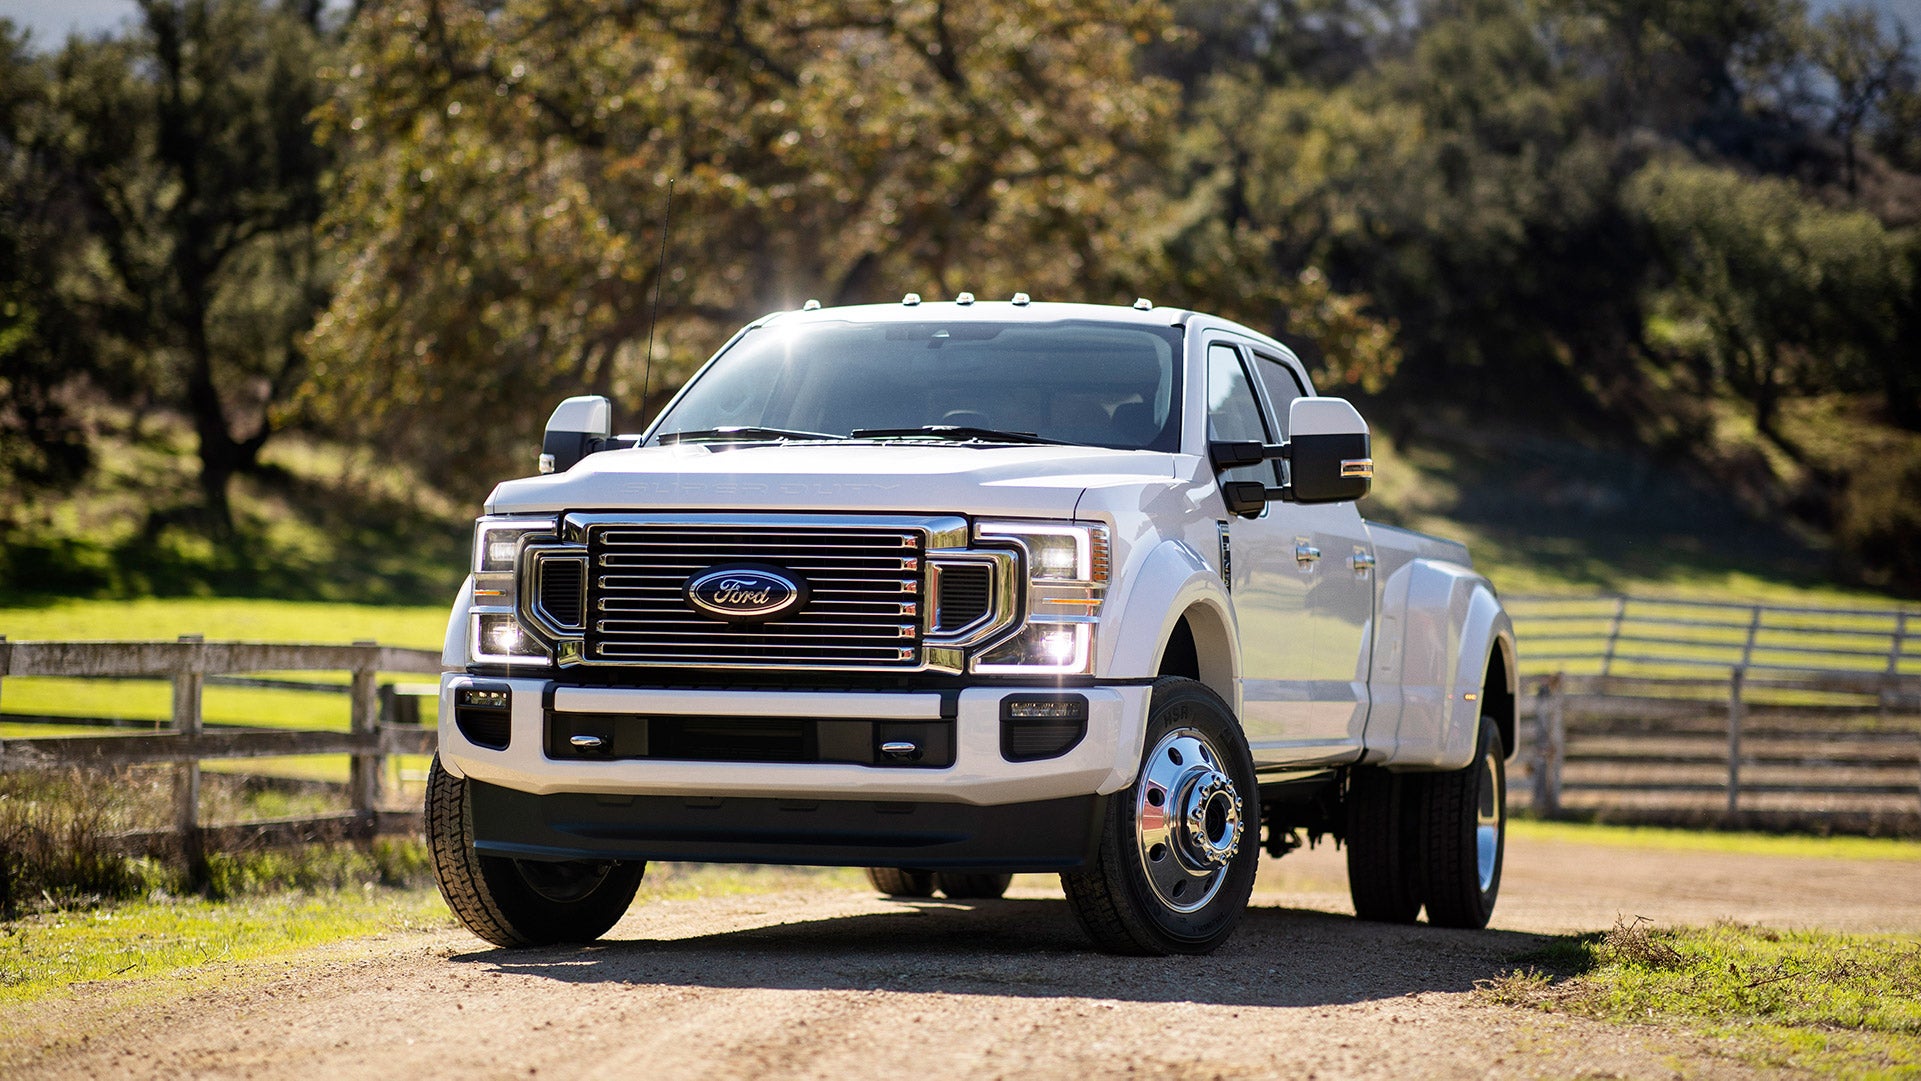 Refreshed 2020 Ford Super Duty Stakes Its Mighty Claim in Today’s Heavy-Duty Truck Fight